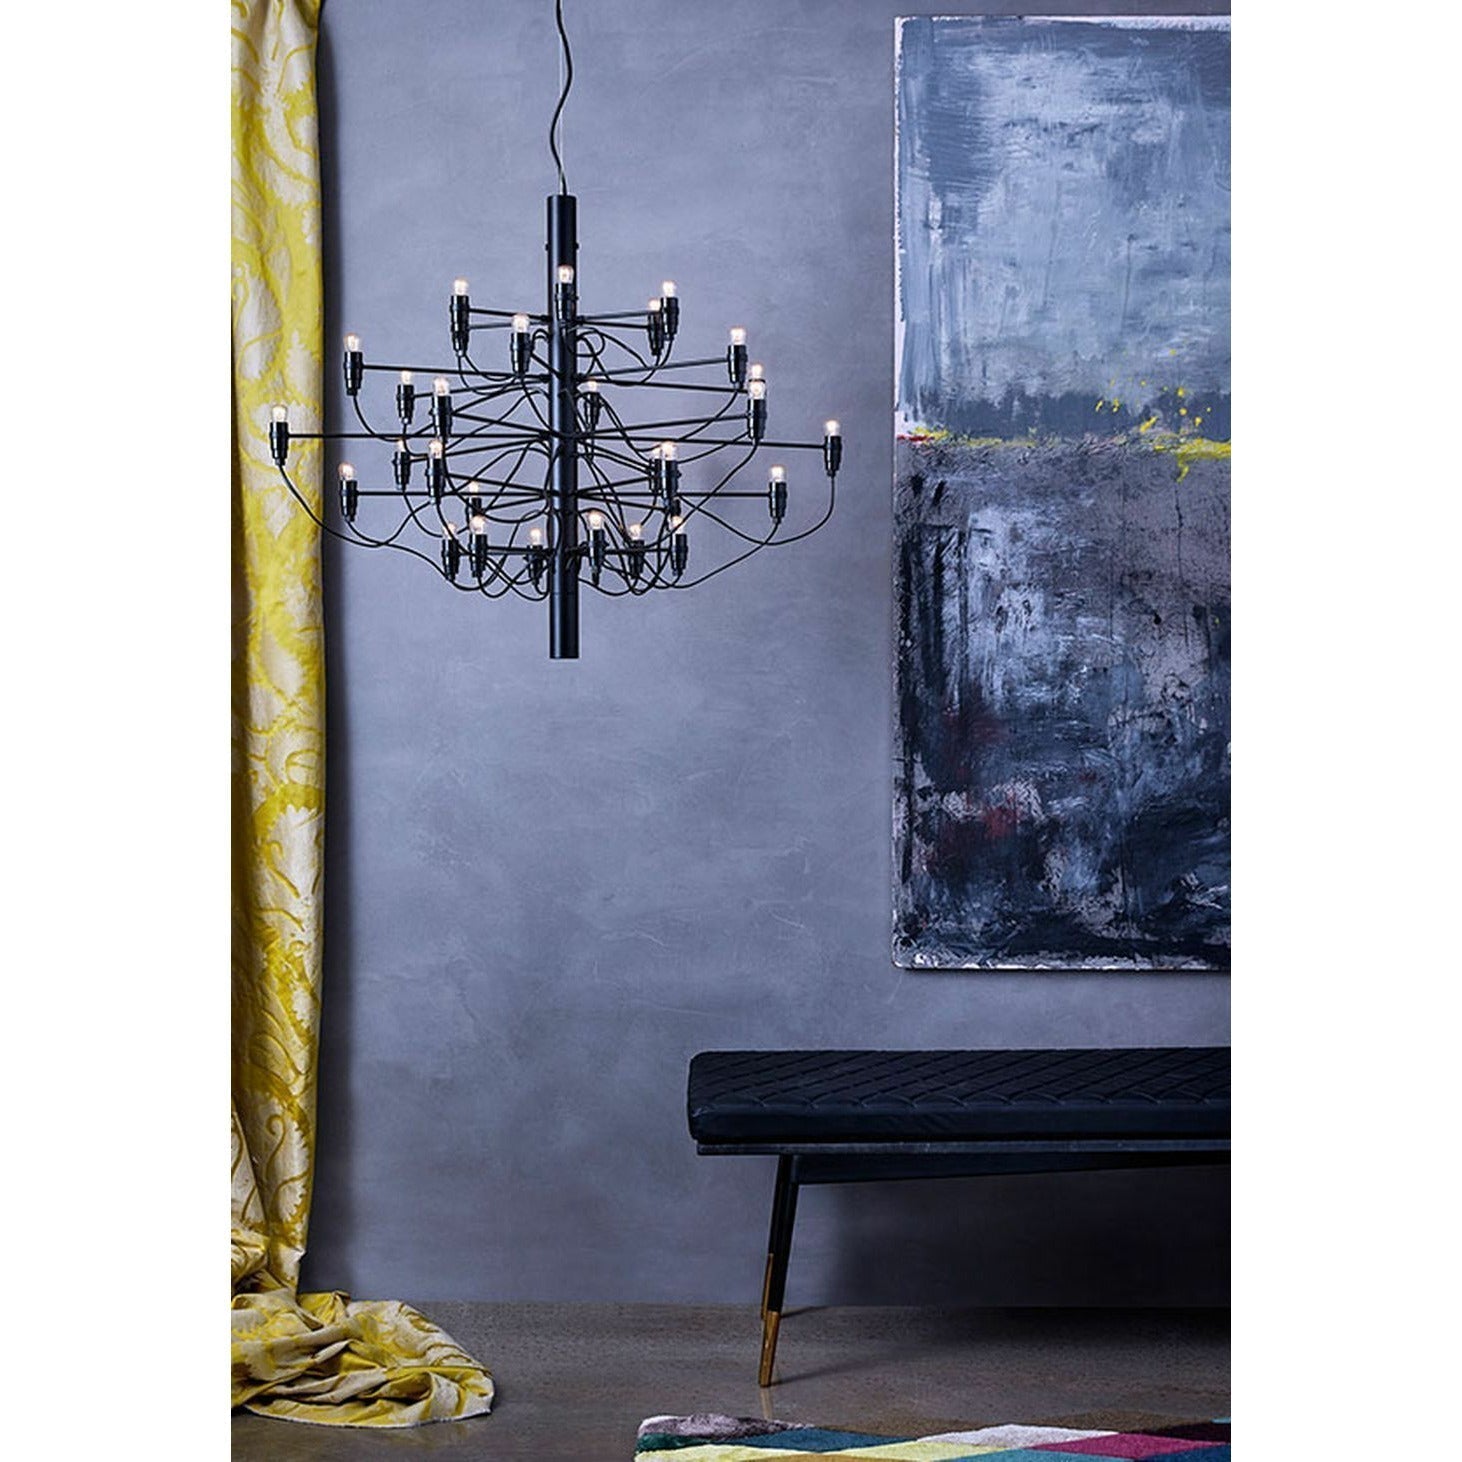 Flos 2097/30 Frosted Chandelier, Chrom